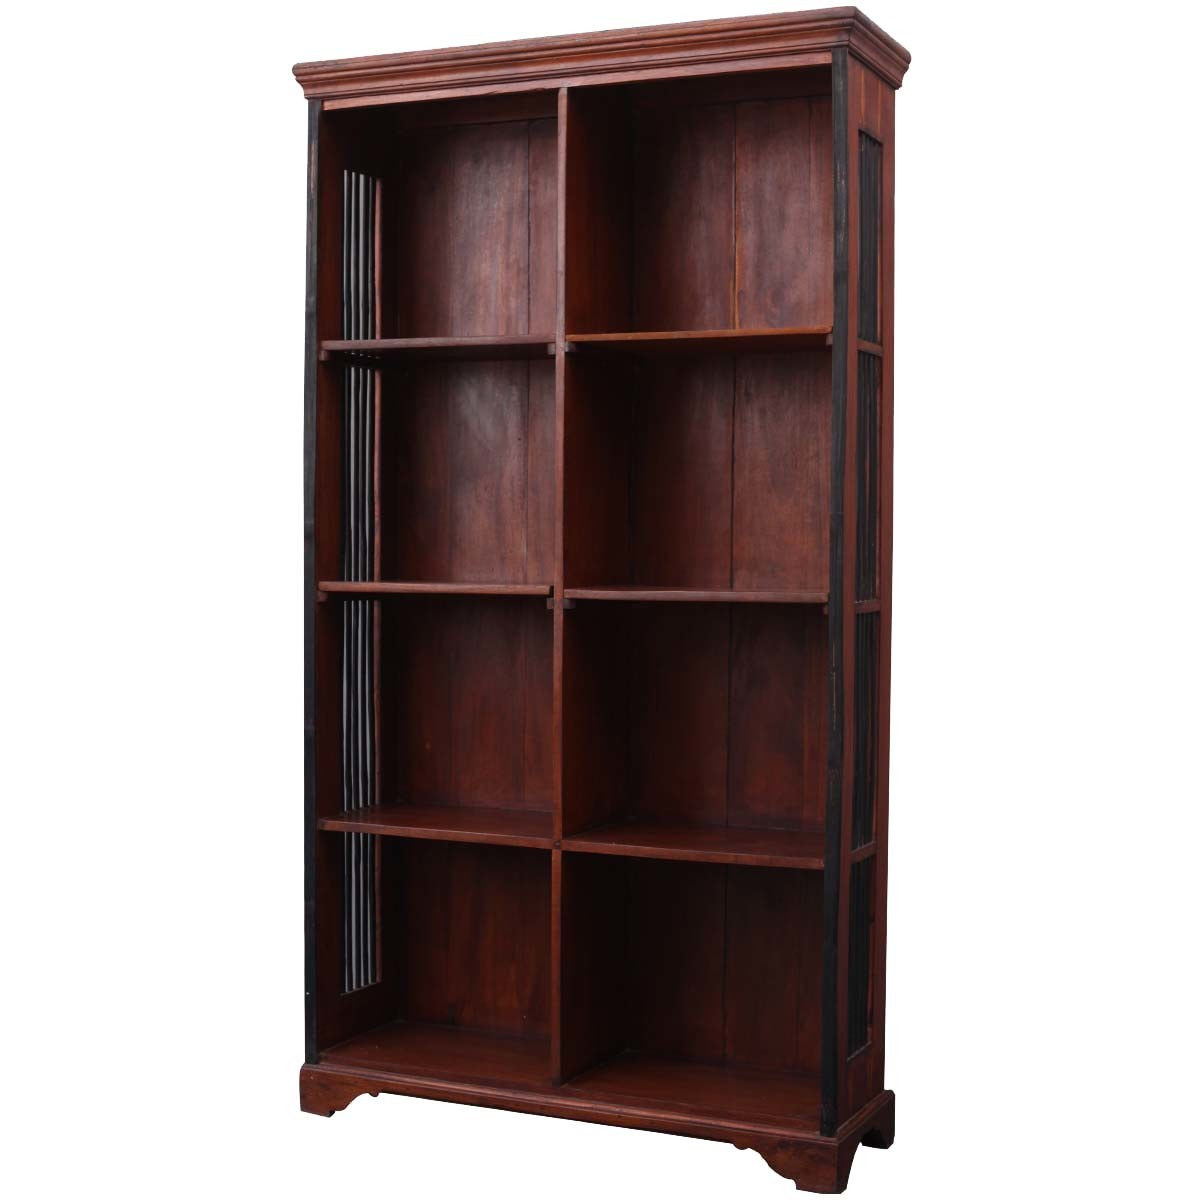 Most Favored Open Wood Shelves Bookshelves That Will Leave pertaining to dimensions 1200 X 1200